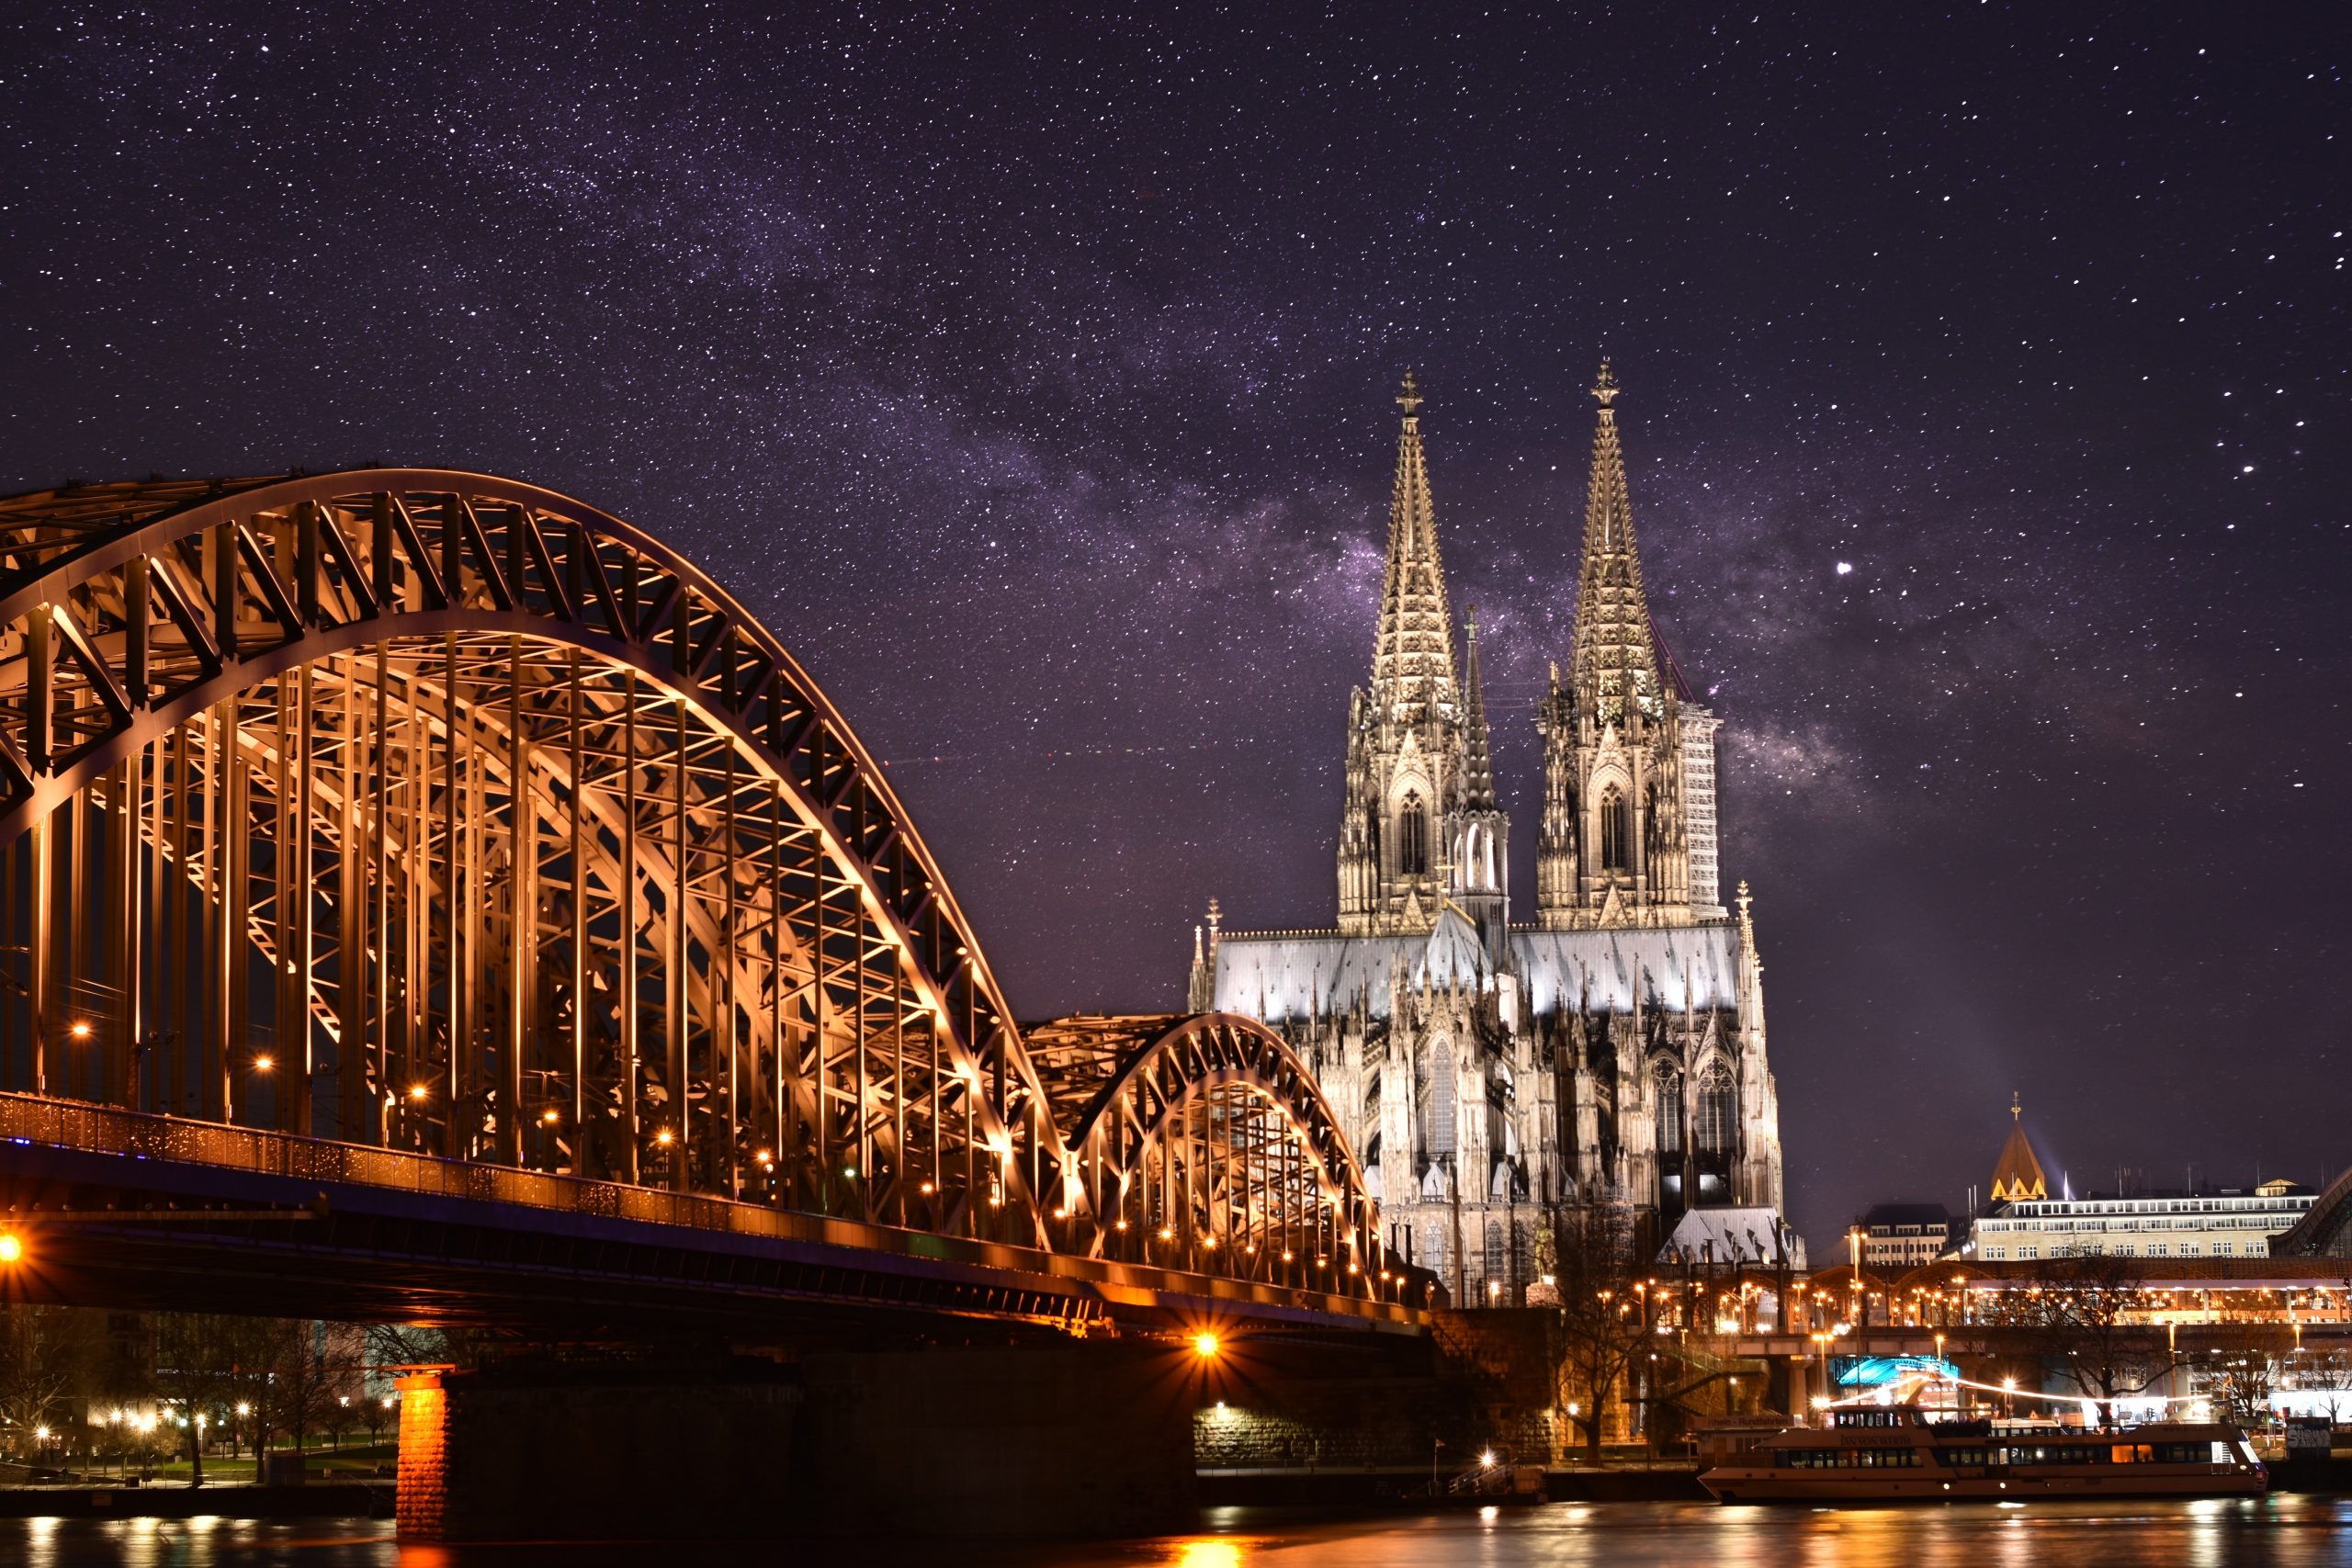 The city of cologne at nighttime